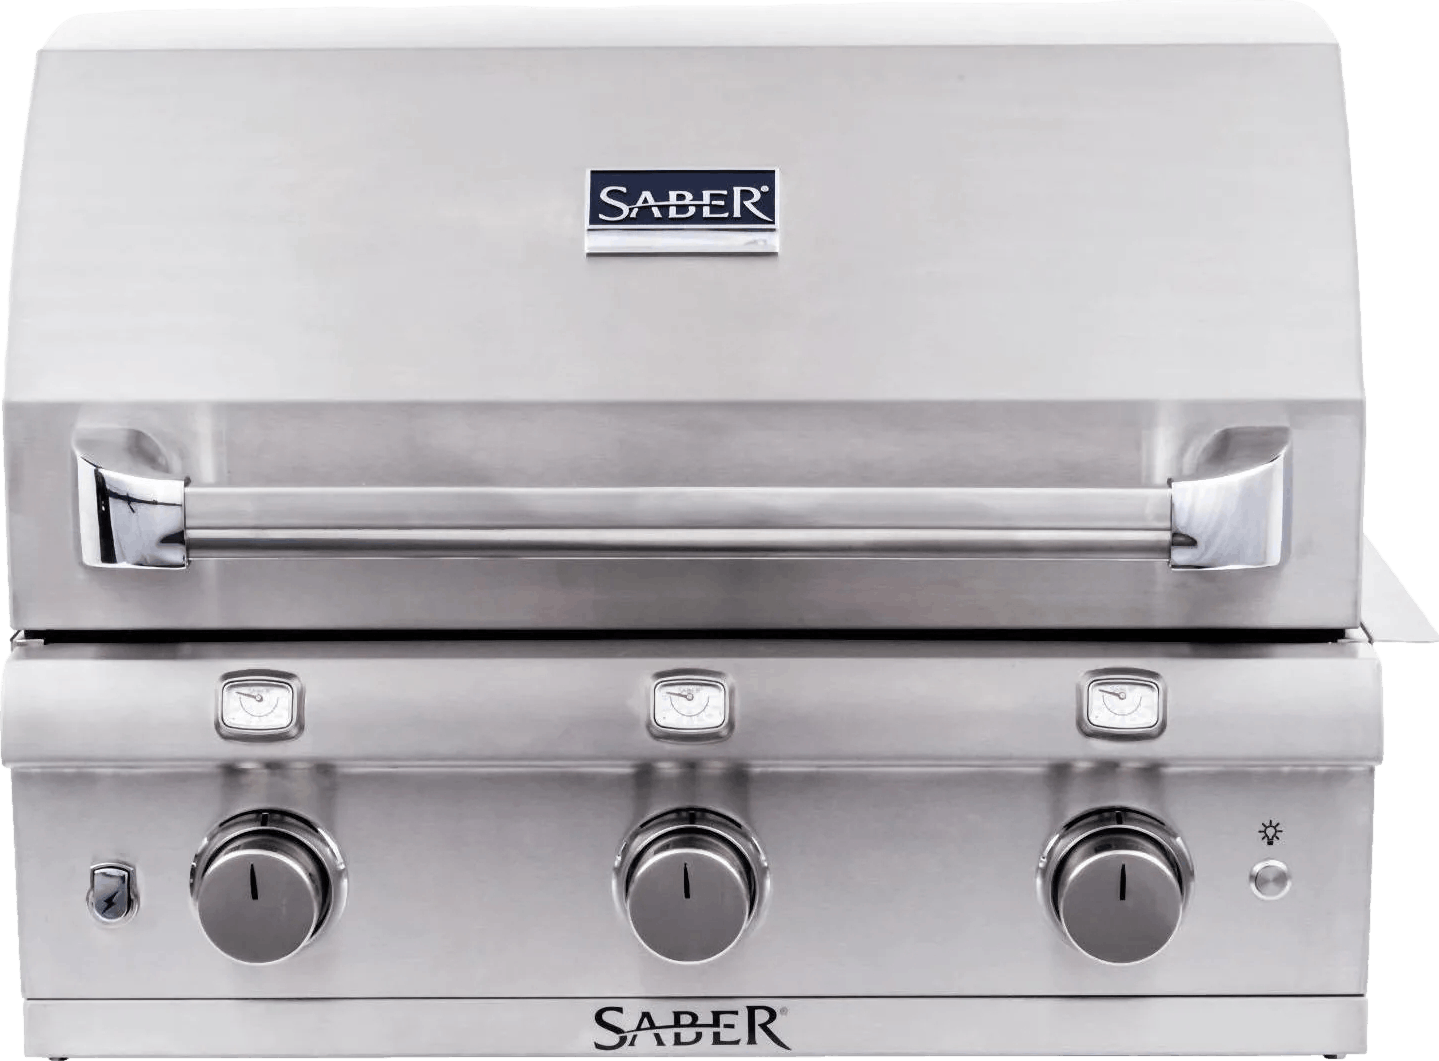 Saber Premium 500 Built-in Gas Grill · 32 in. · Natural Gas